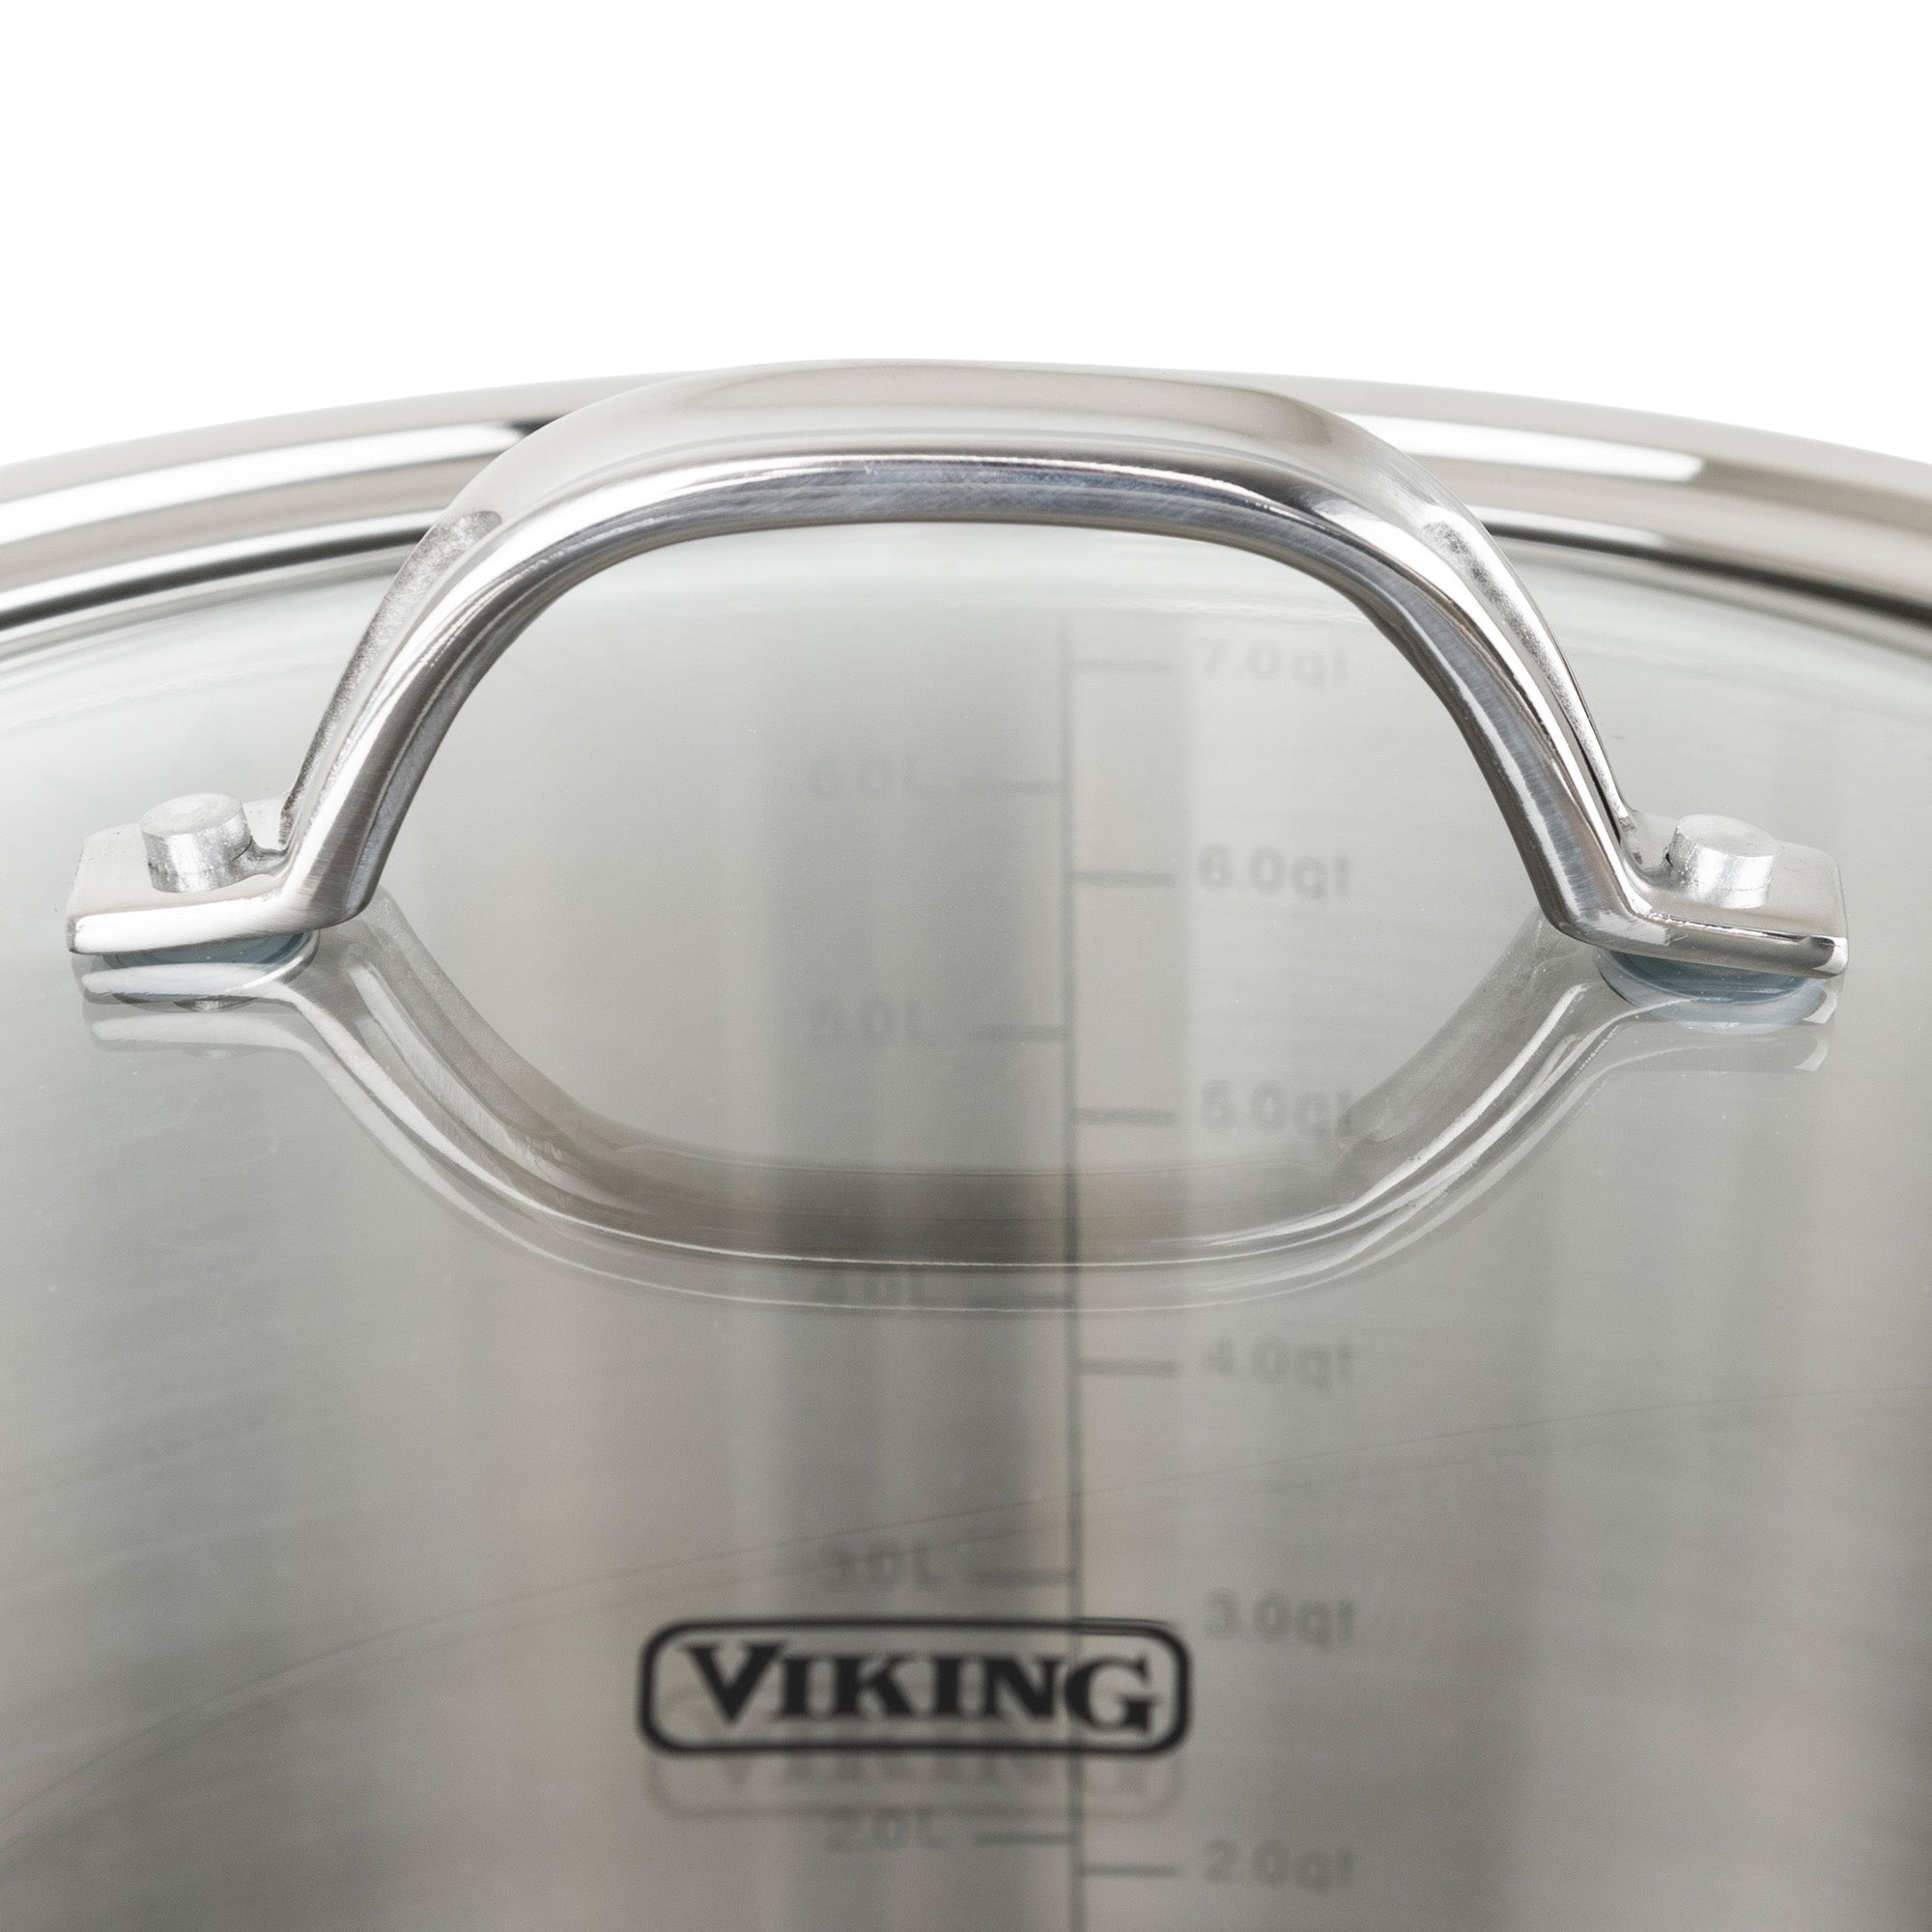 Viking 3-Ply 17-Piece Stainless Steel Cookware Set